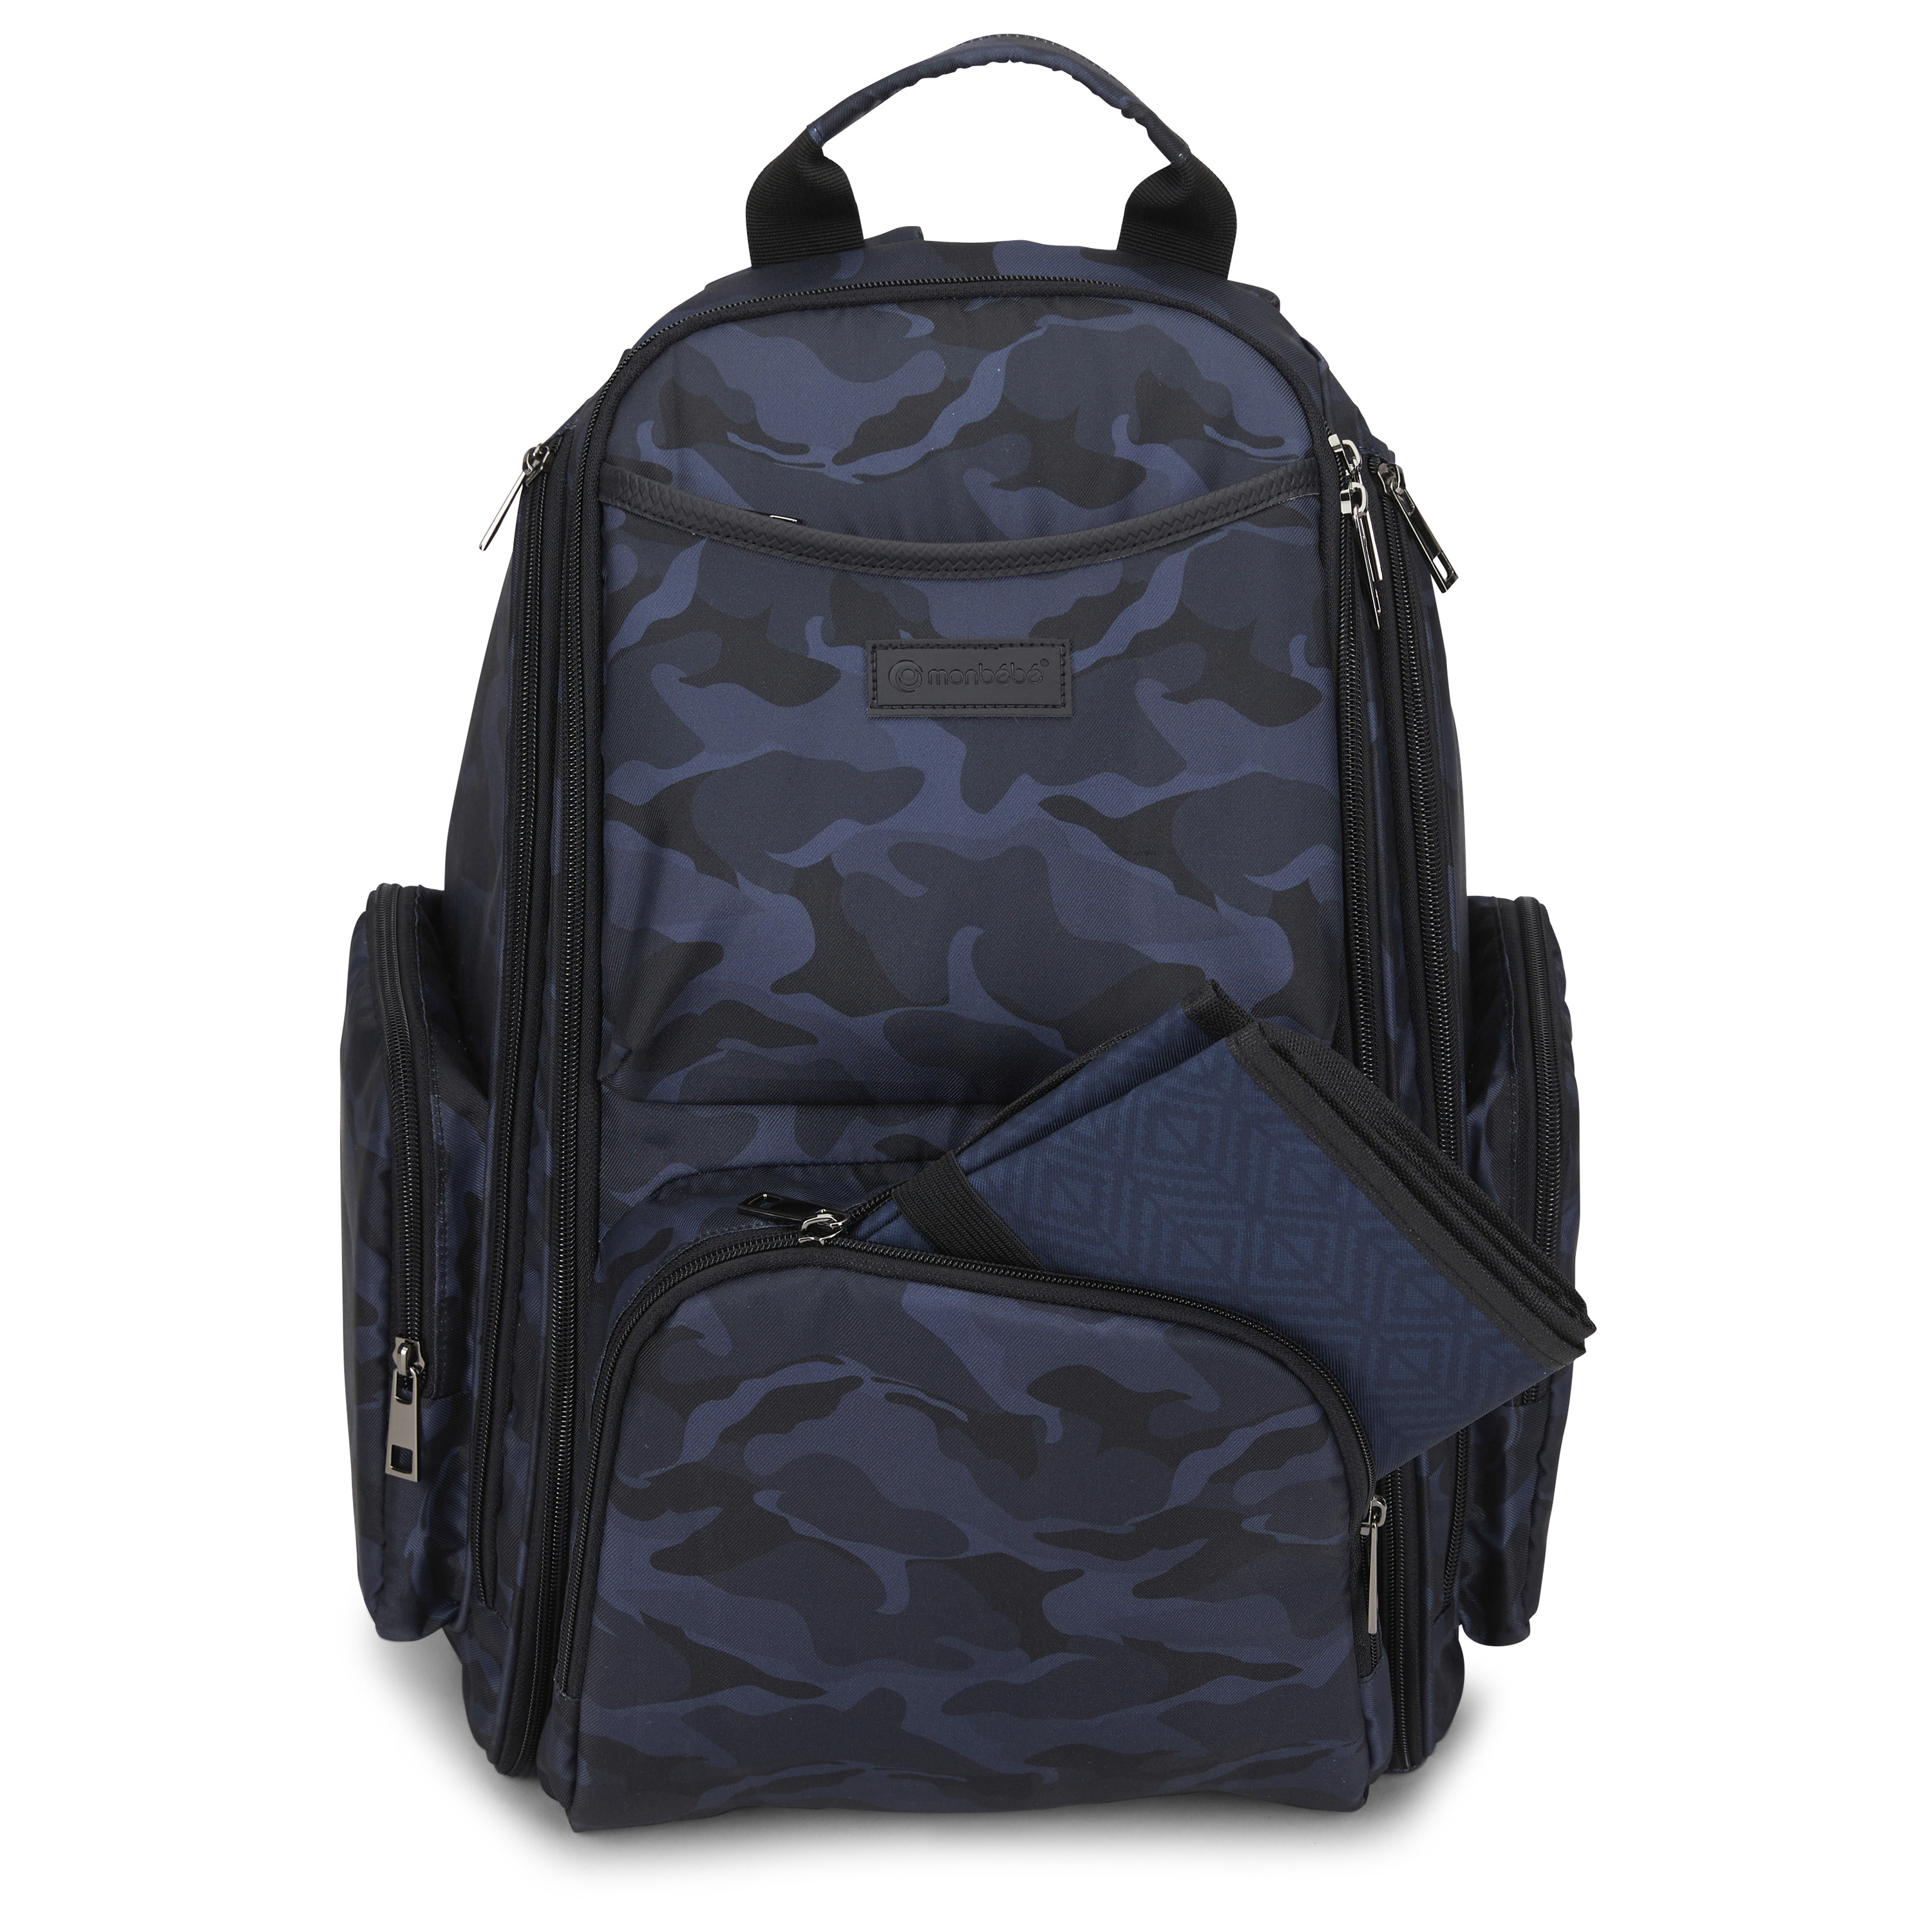 Monbebe Infant Diaper Bag Backpack with Changing Pad, Navy Camo - image 1 of 15